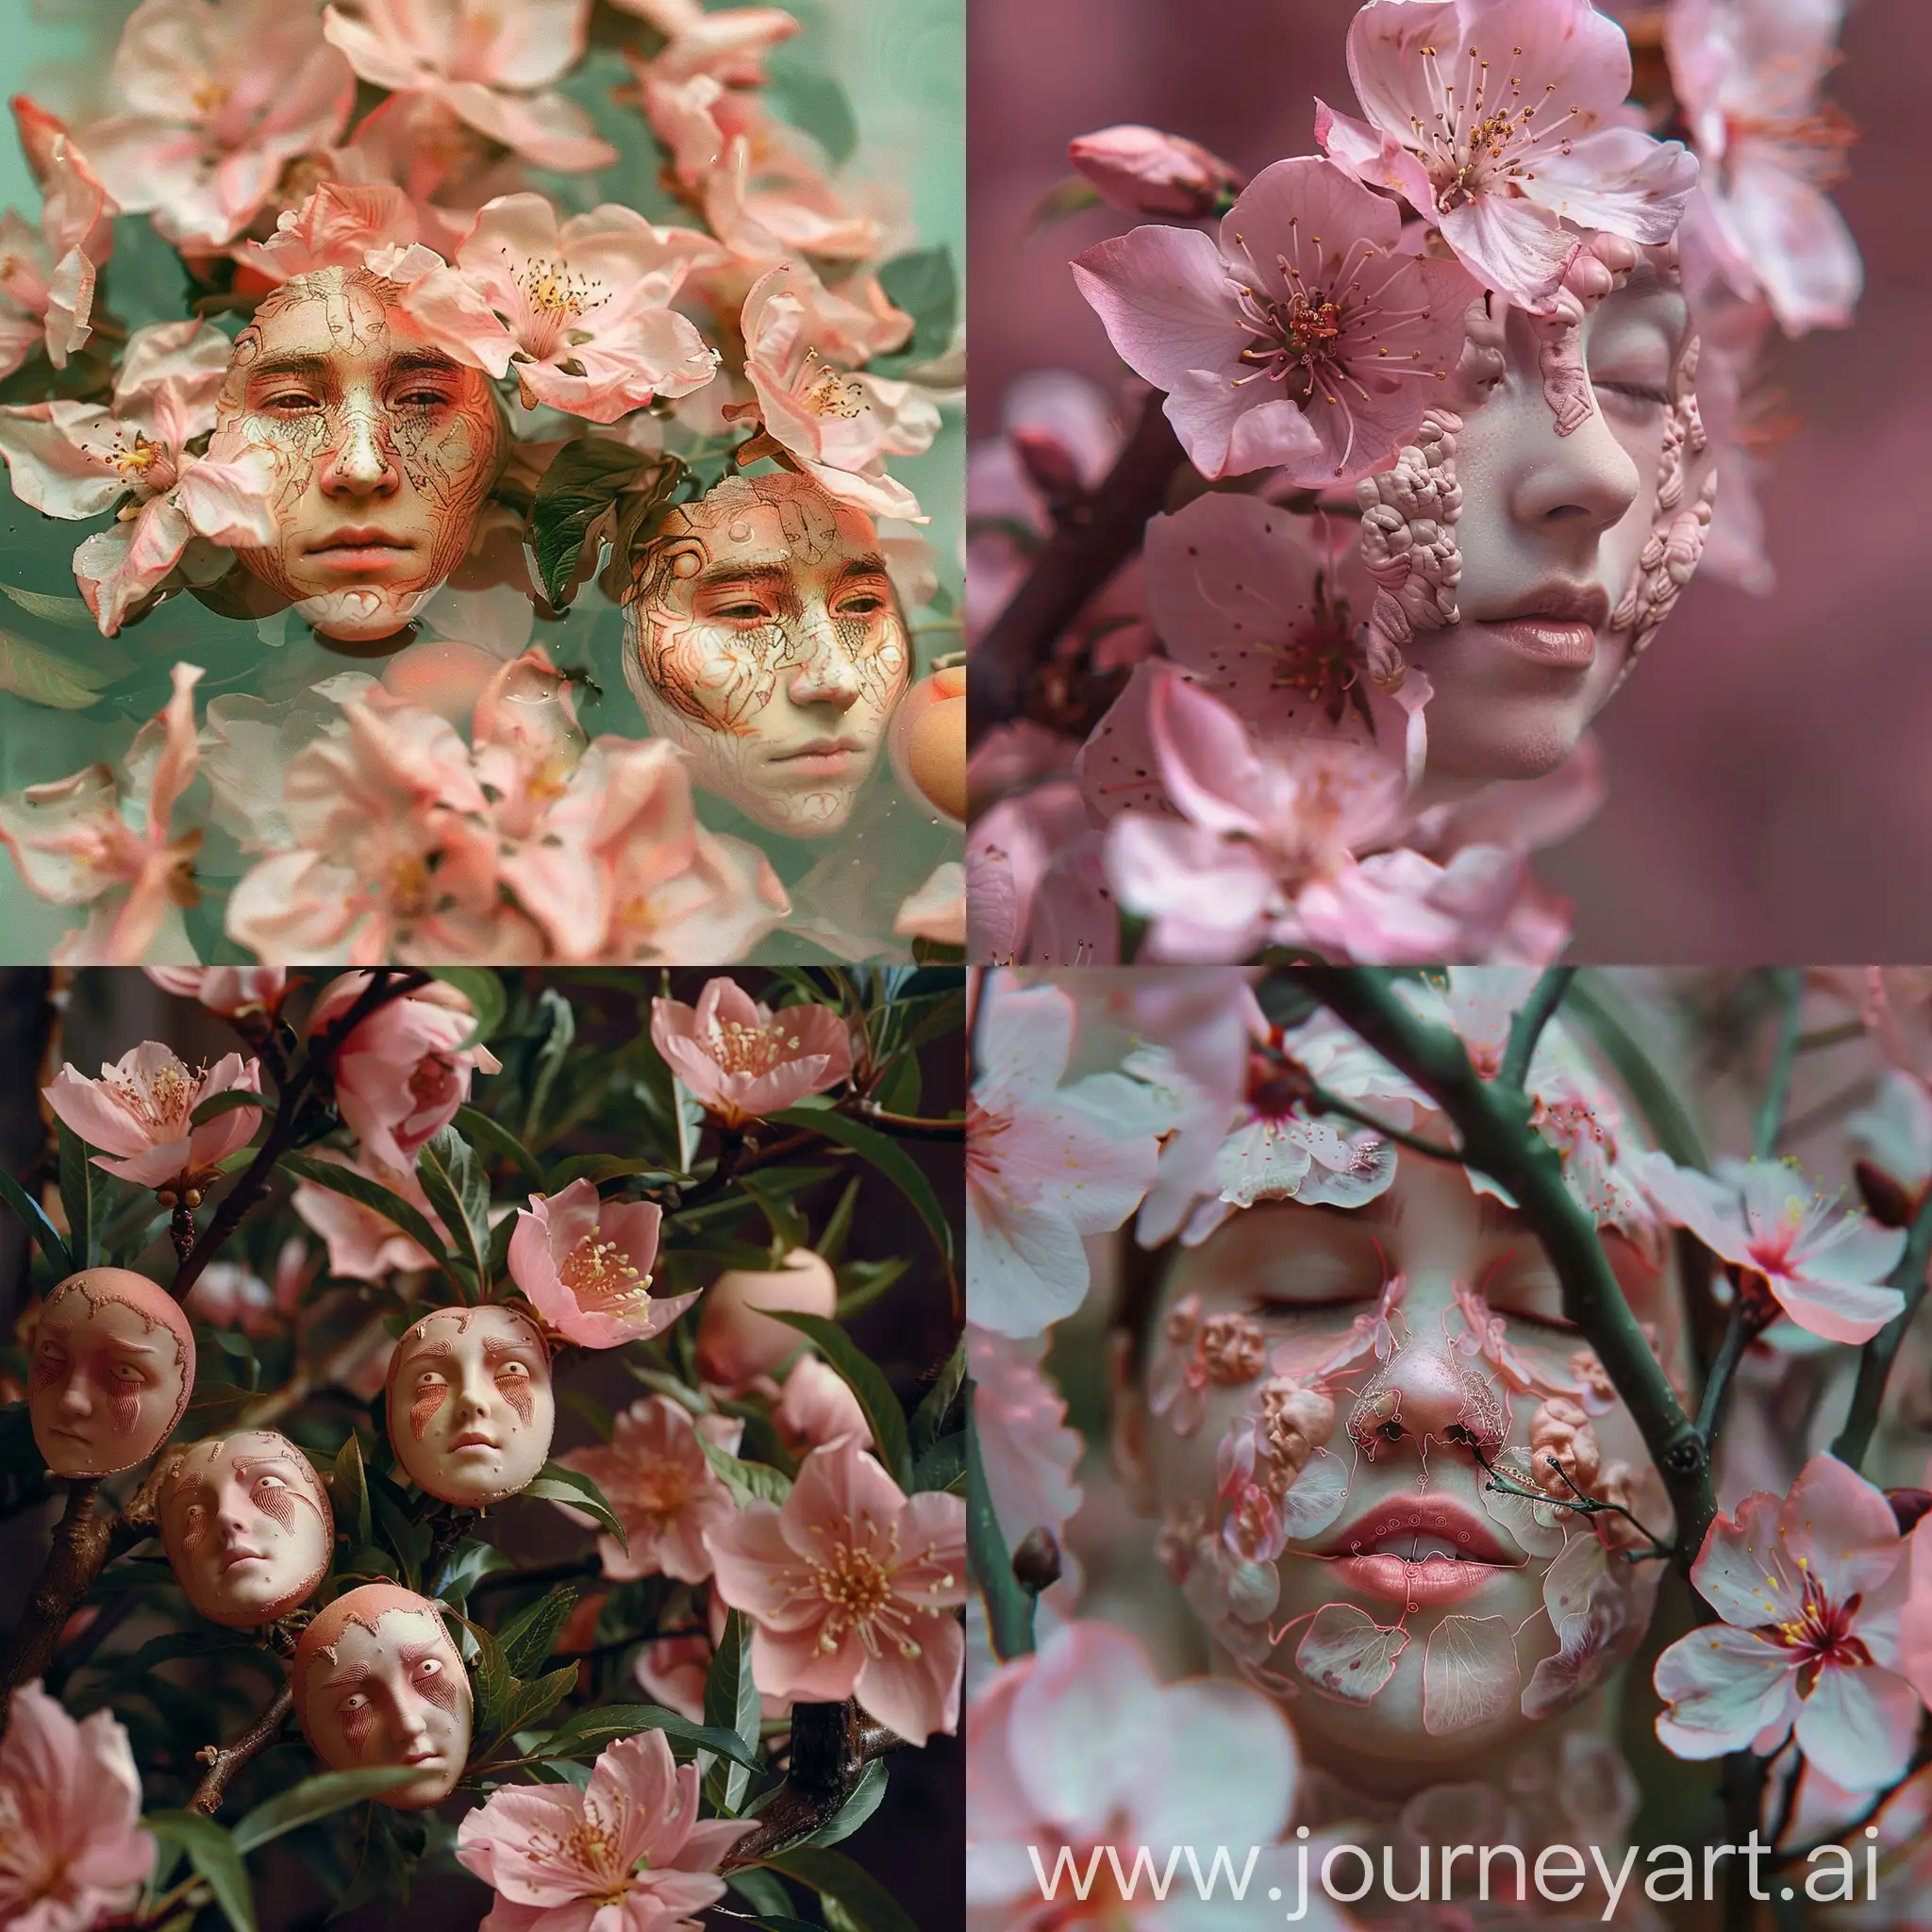 Peach-Blossoms-with-Human-Faces-Whimsical-Portrait-of-Natures-Personified-Beauty